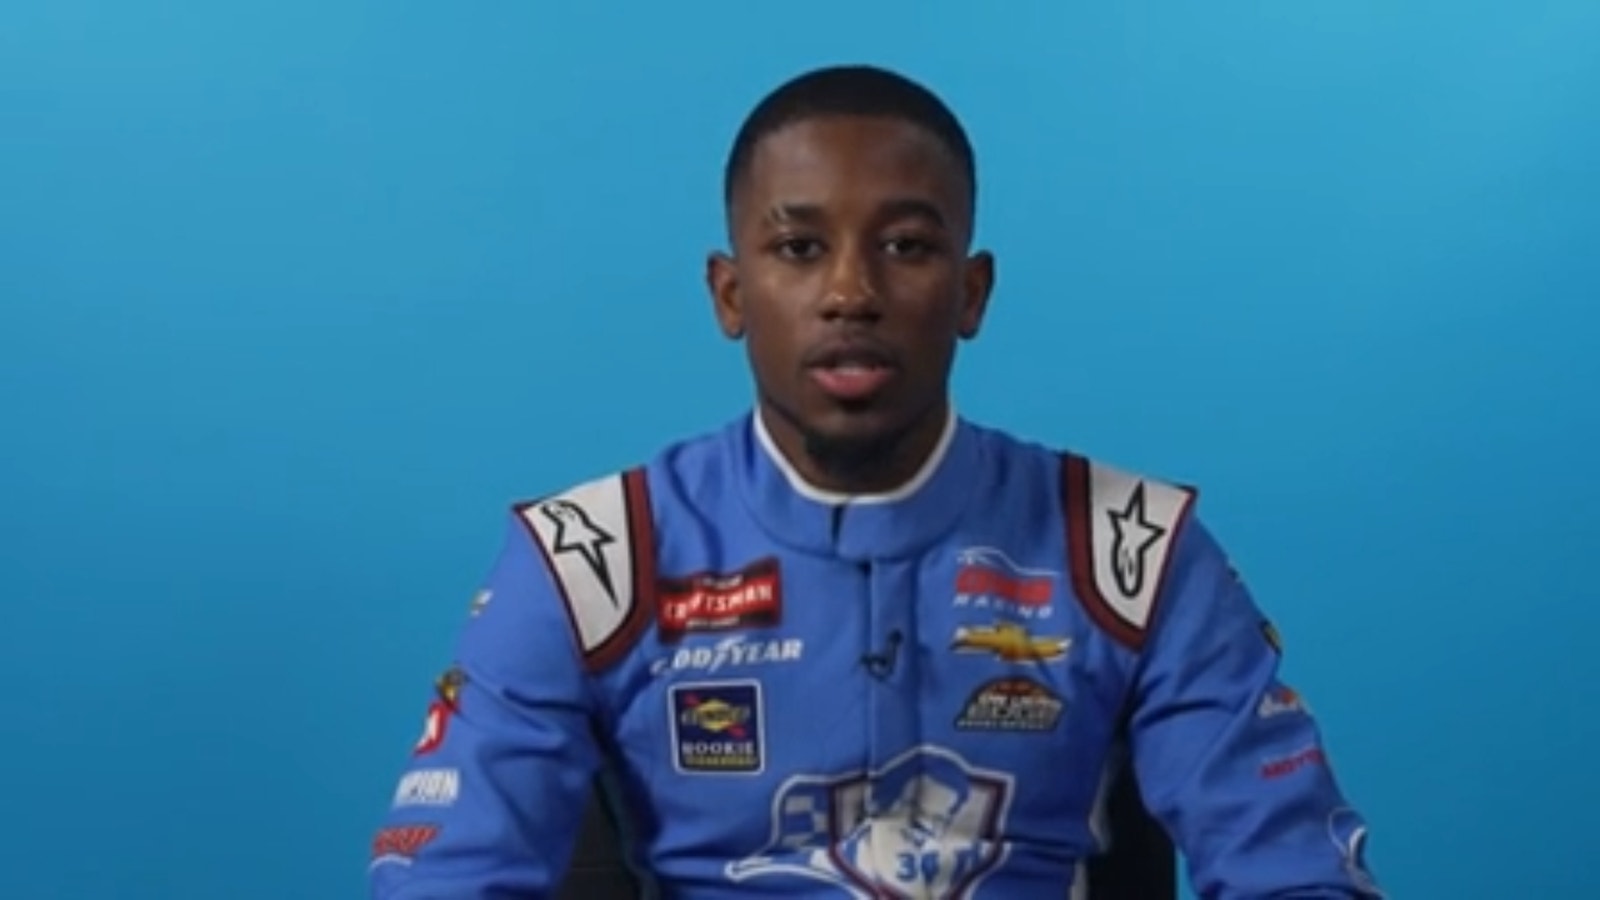 Rajah Caruth on his path to NASCAR